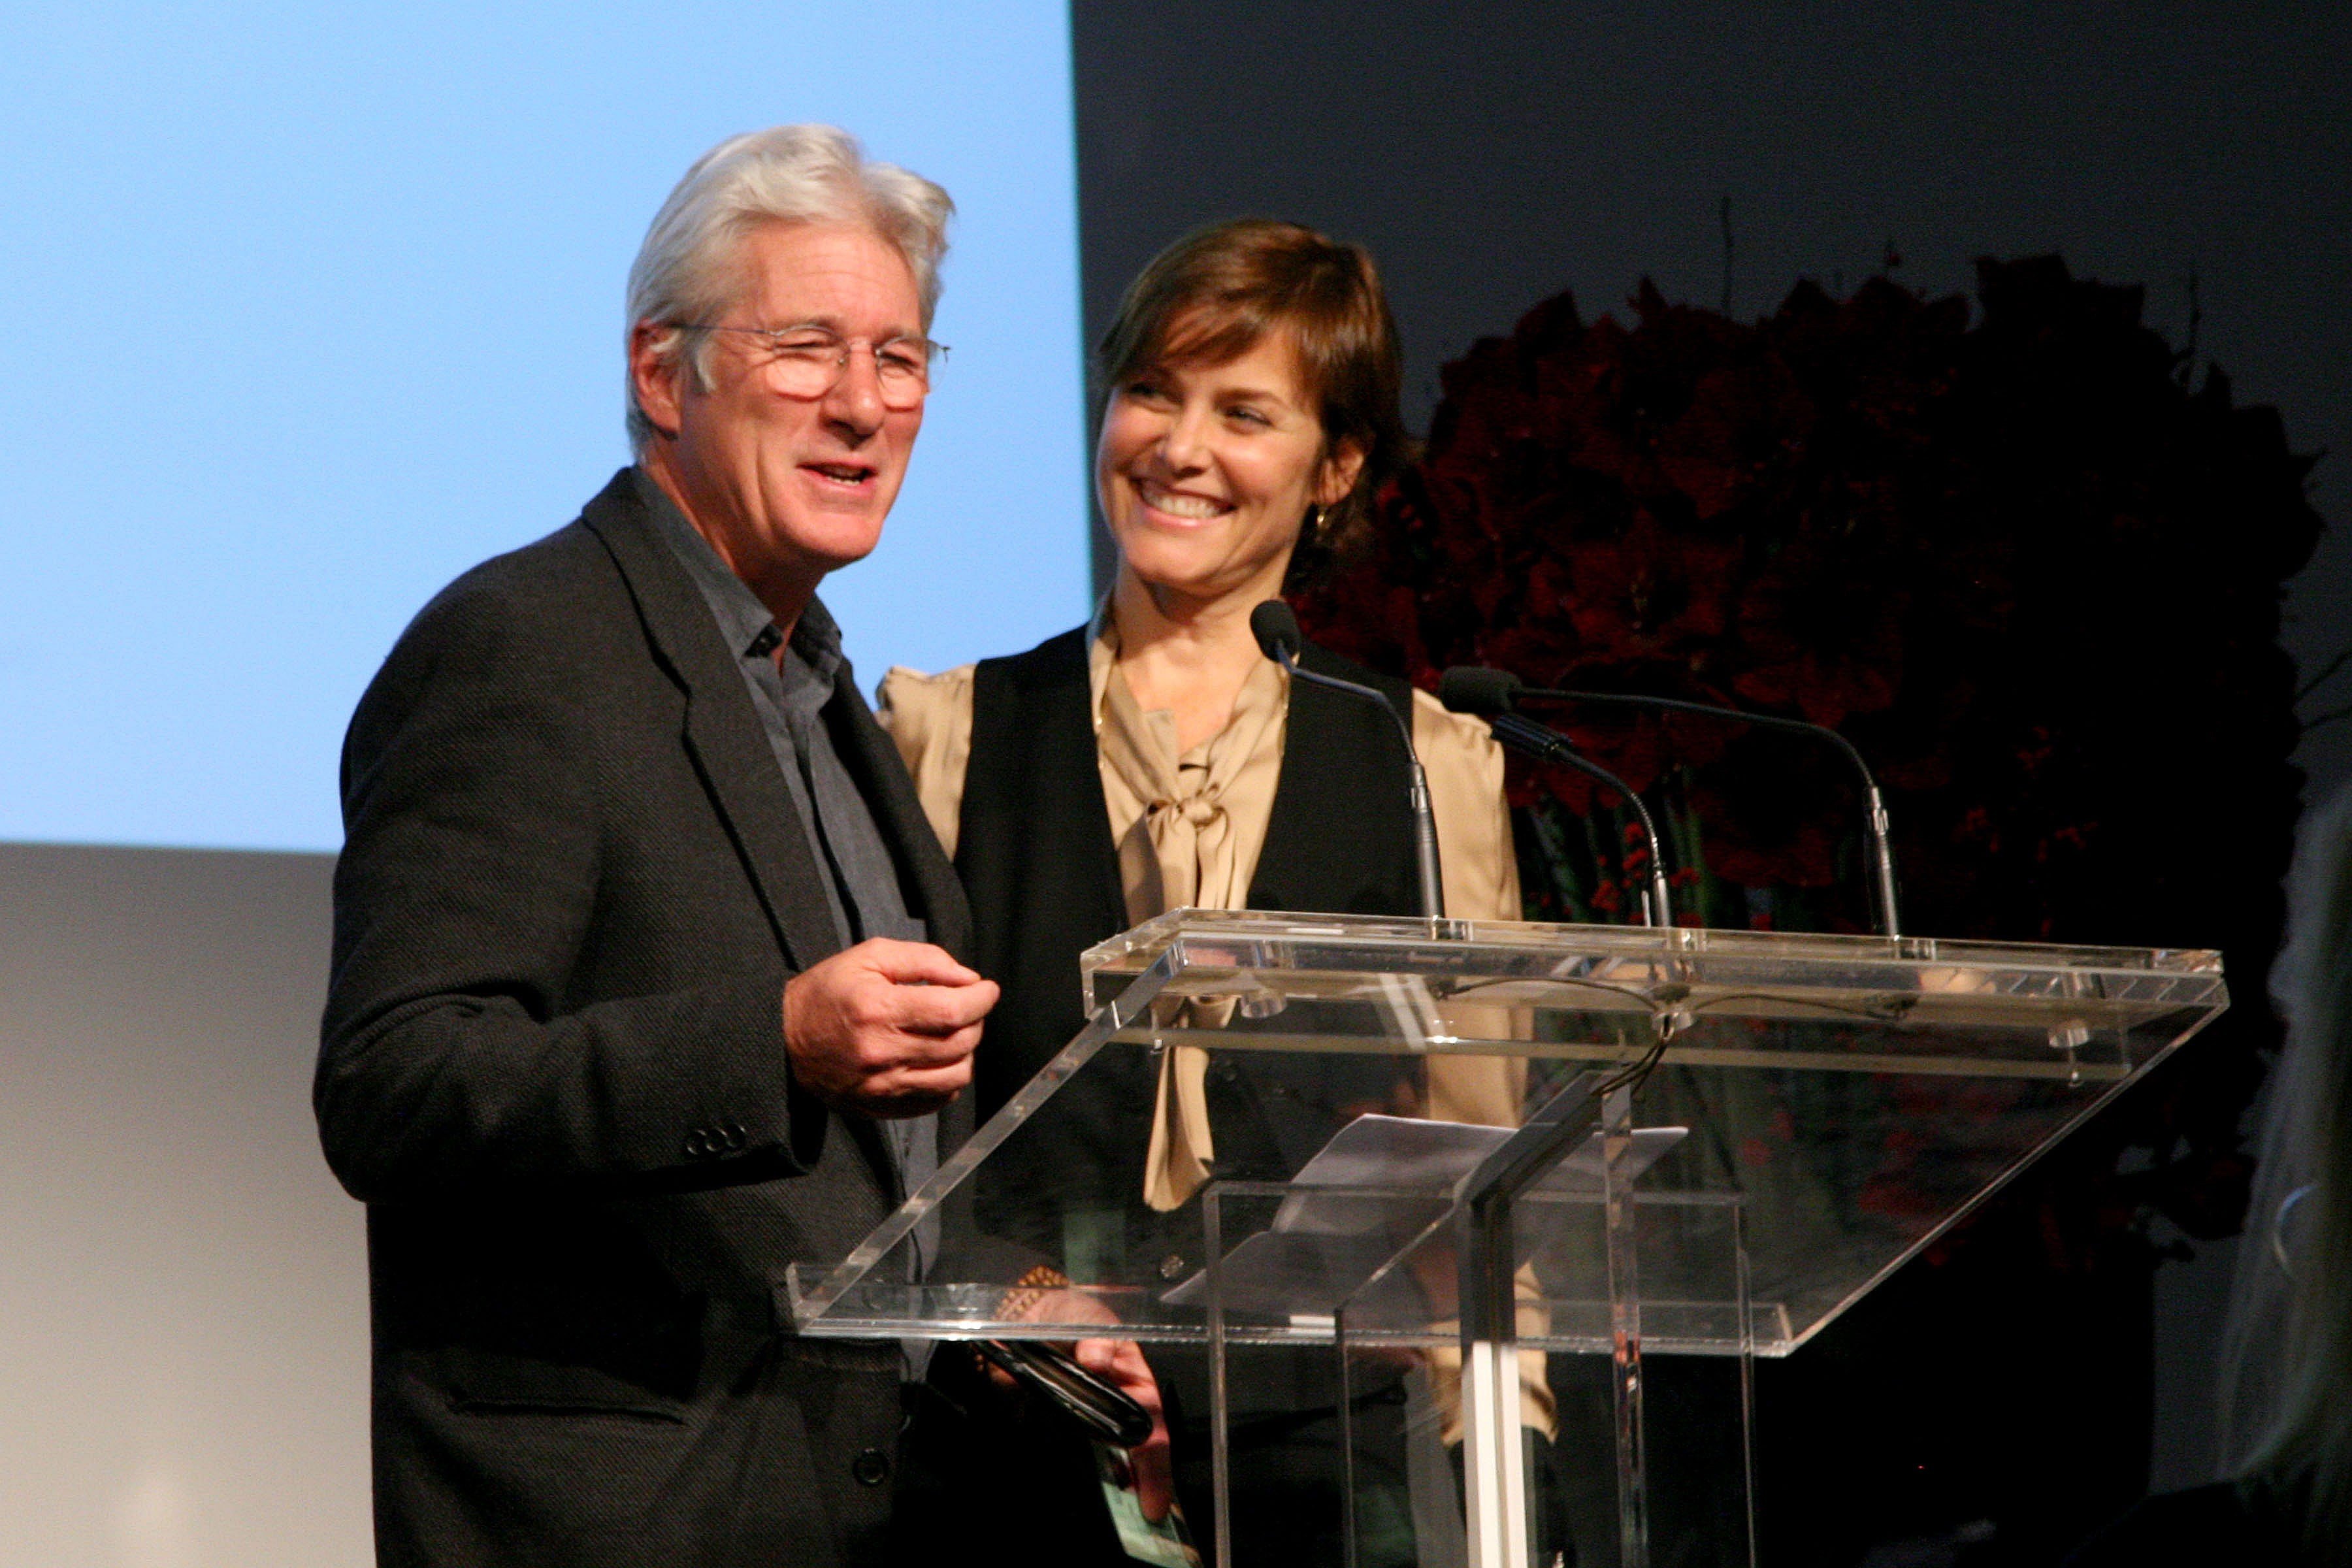 Carey Lowell and Richard Gere at the 16th annual ARTWALK NY honoring legendary artist James Rosenquist on November 4, 2010 | Source: Getty Images